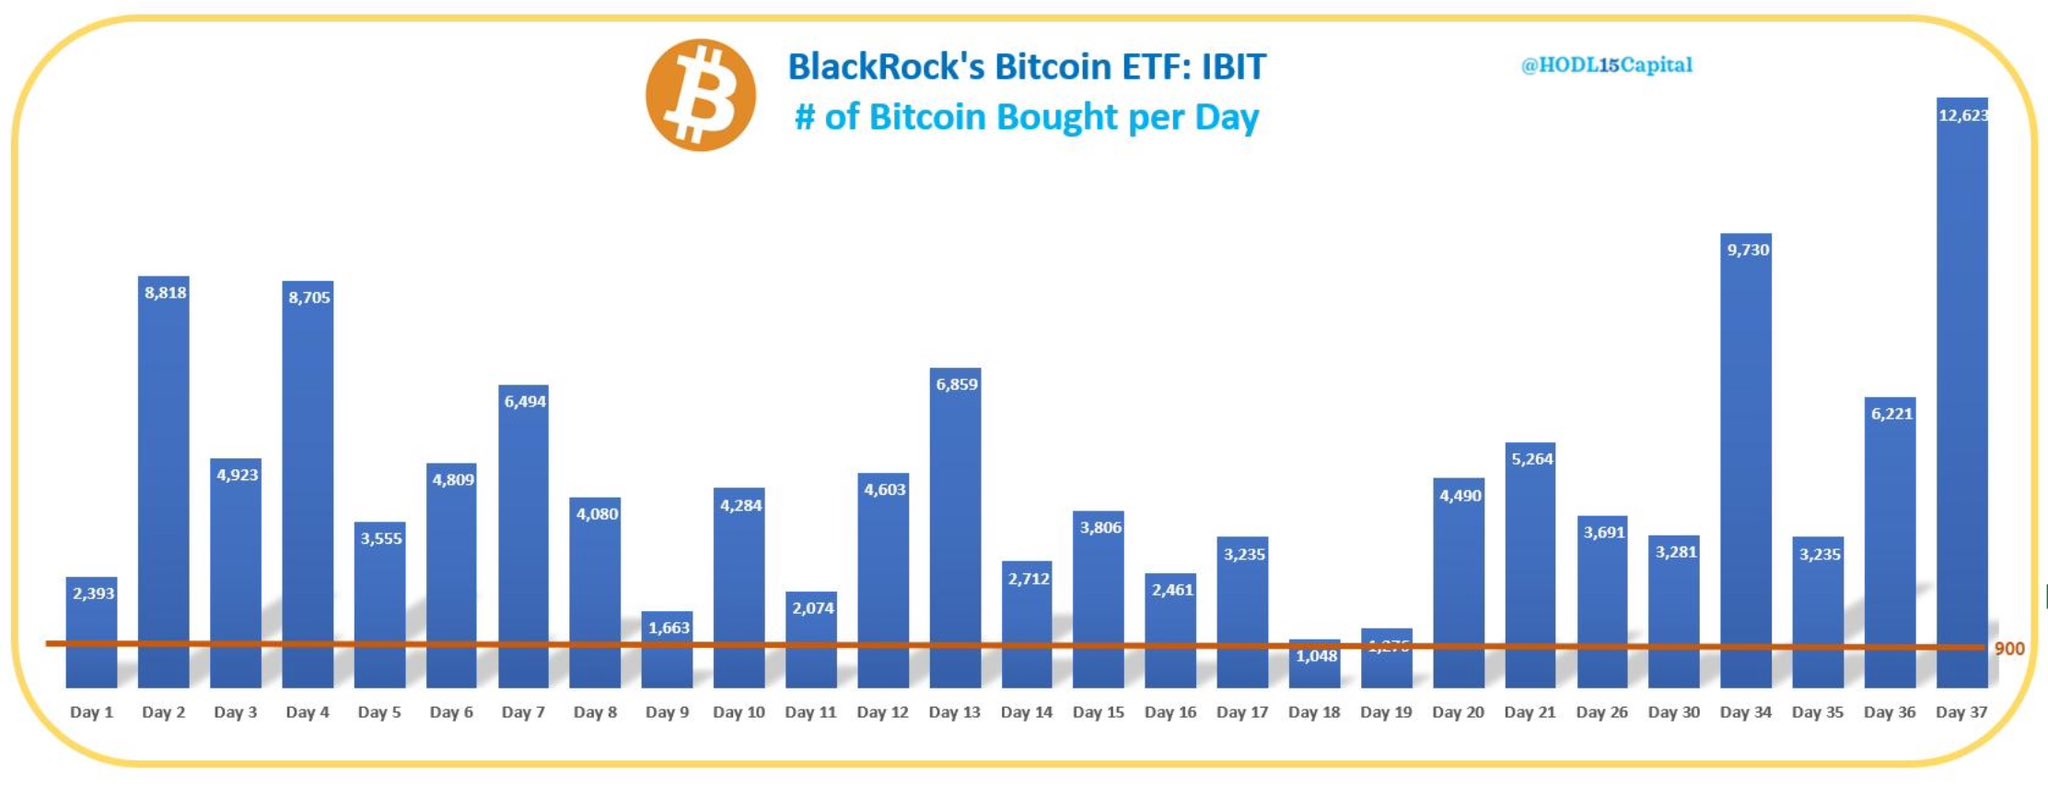 Blackrock's Bitcoin ETF Acquires 12,623 BTC in Largest Single-Day Purchase Since Launch